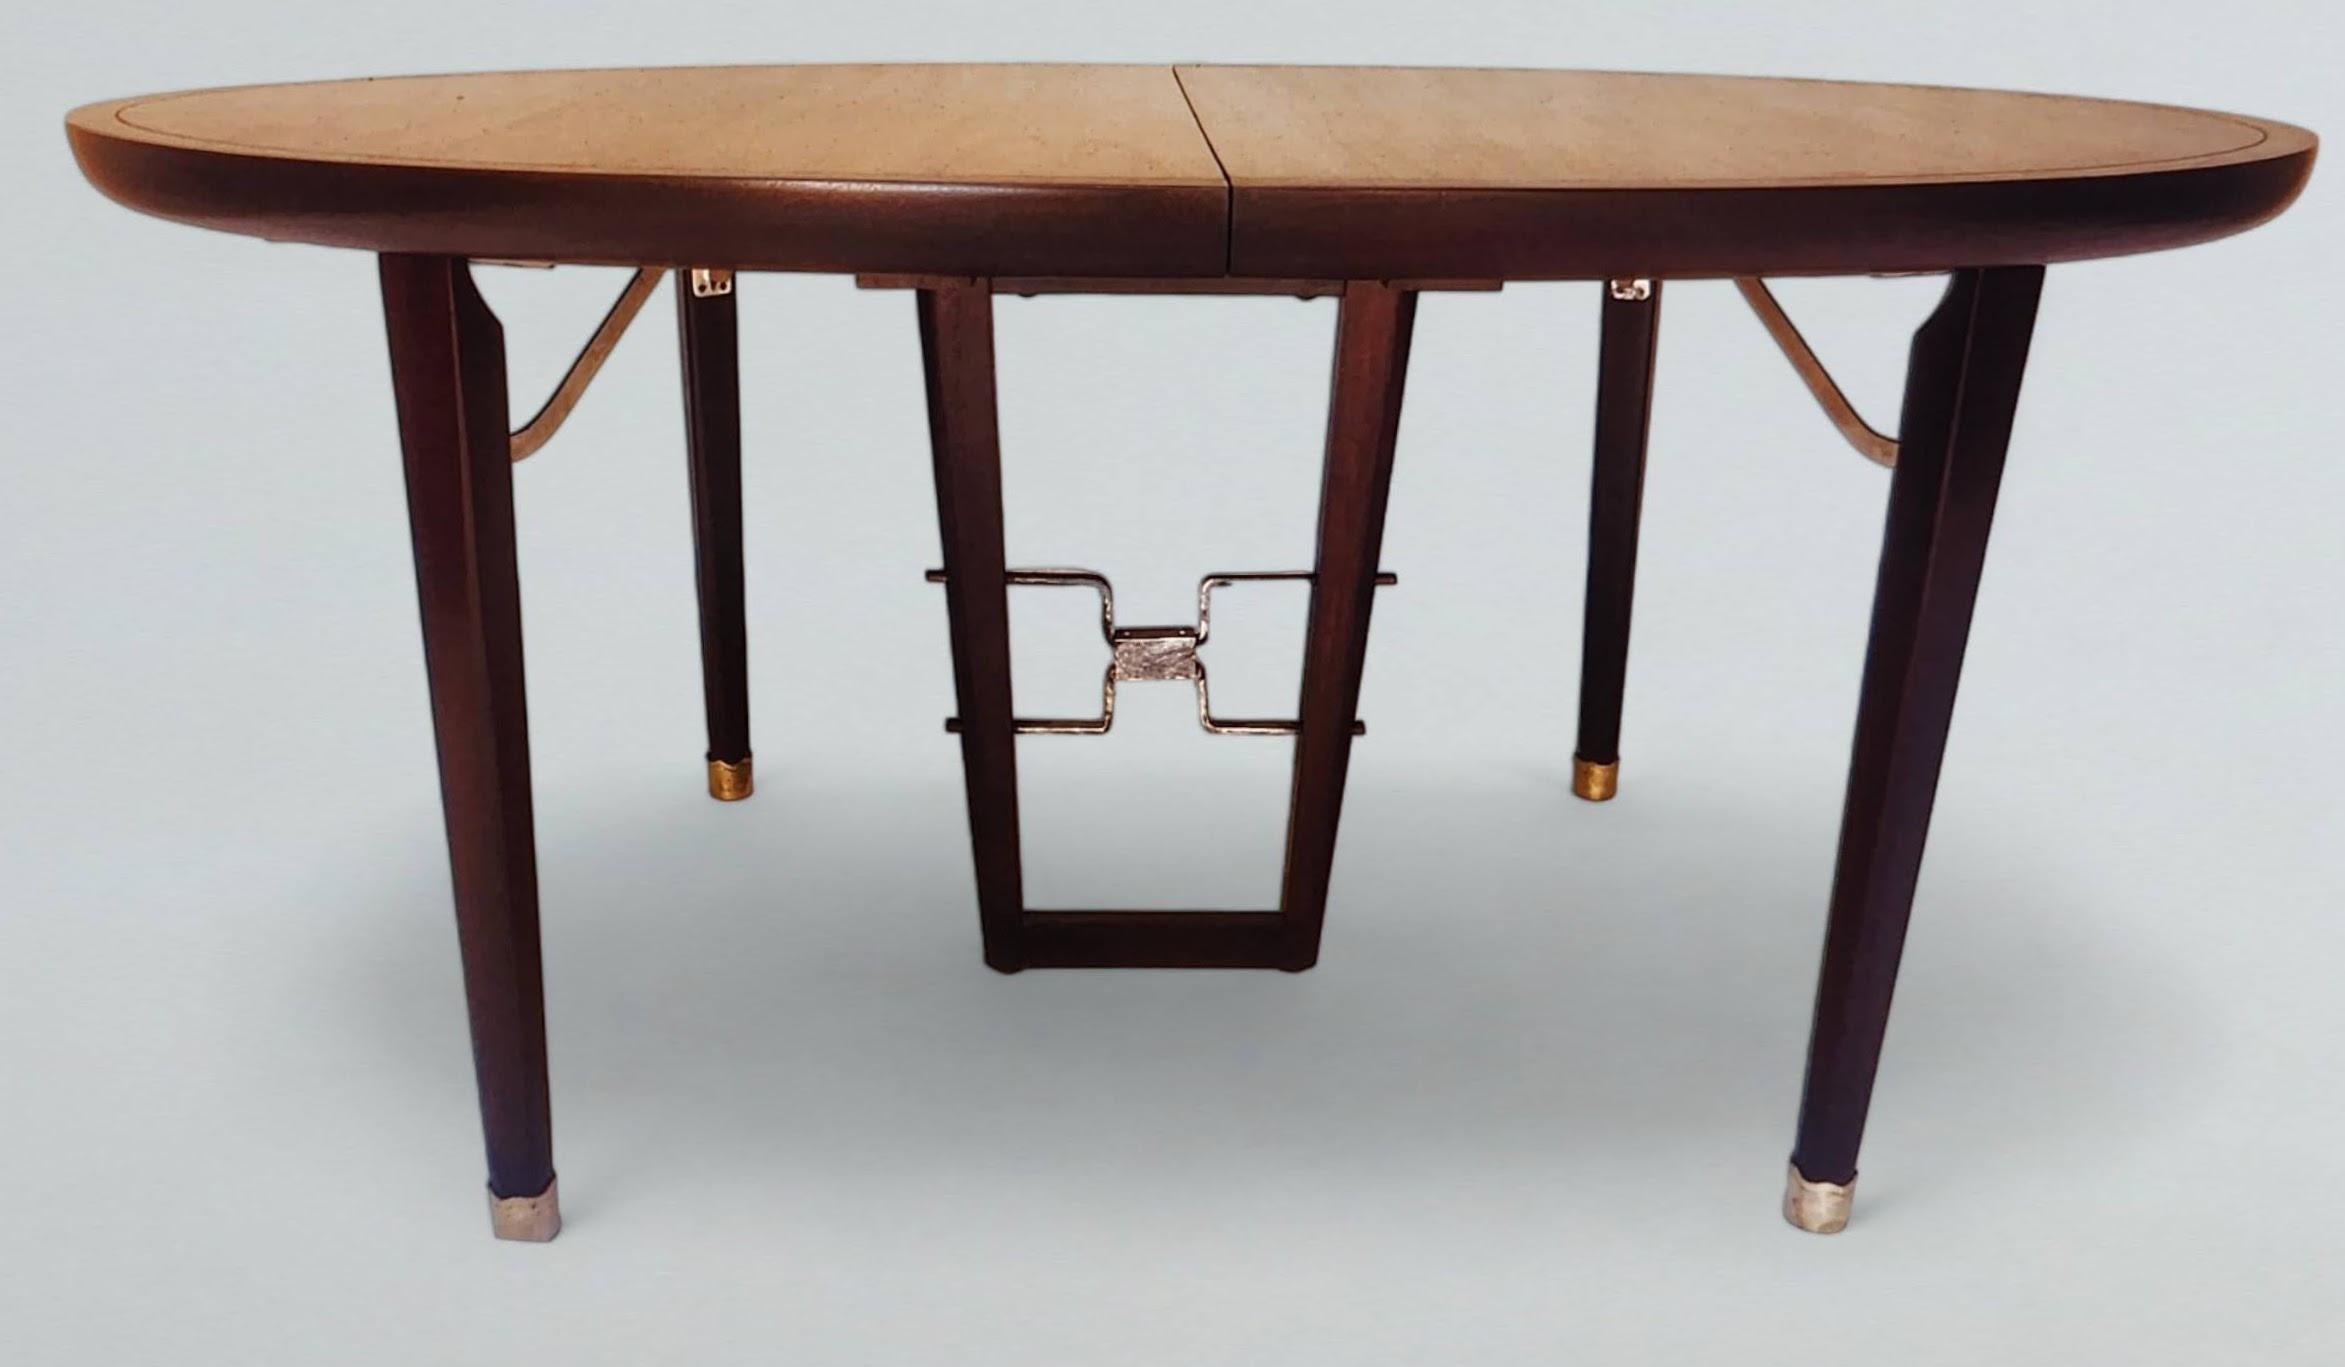 Edmond Spence Six Piece Mahogany Dinning Set for Industria Mueblera, S.A. 1950s  For Sale 5